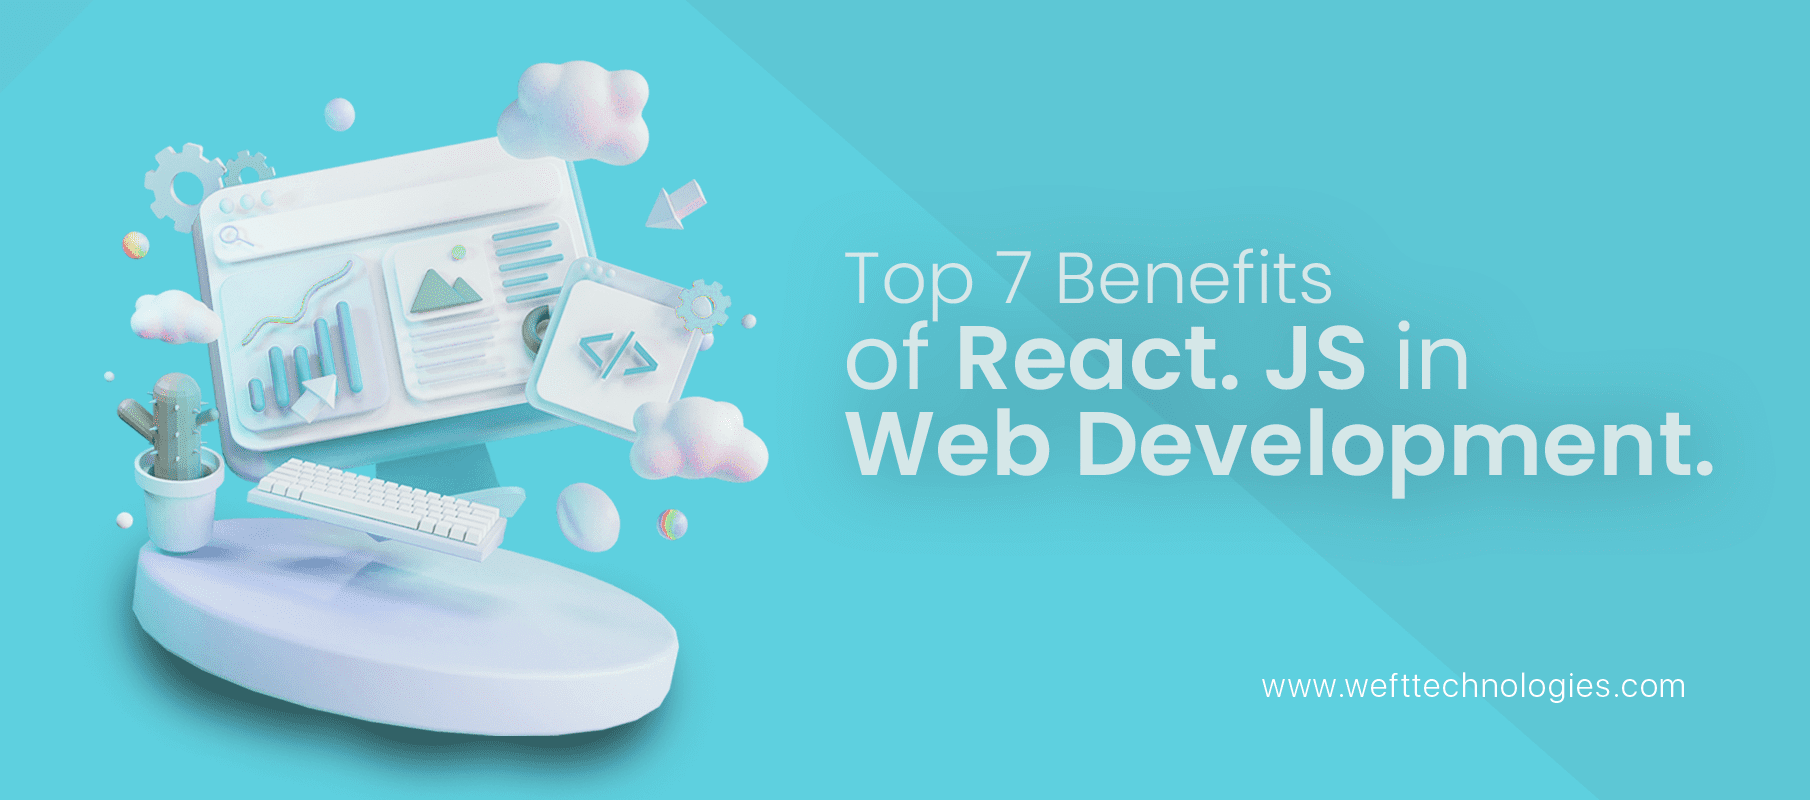 Top 7 Reasons for Using React.Js in Web Development